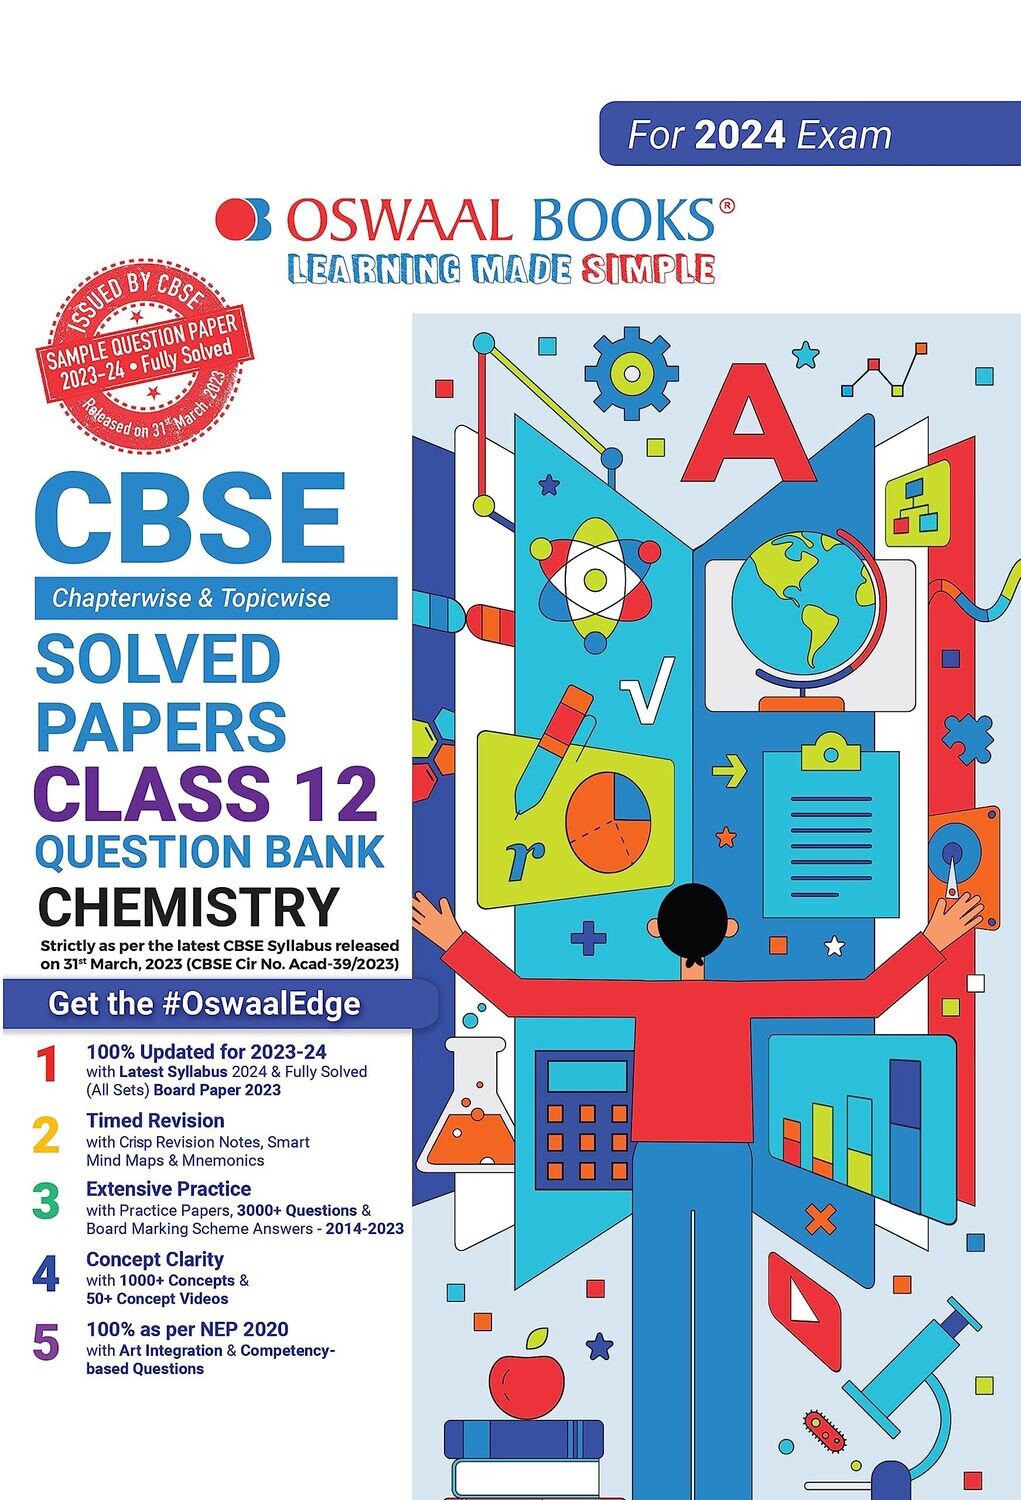 Oswaal CBSE Chapterwise Solved Papers 2023-2014 Chemistry Class 12th (For 2024 Board Exams)